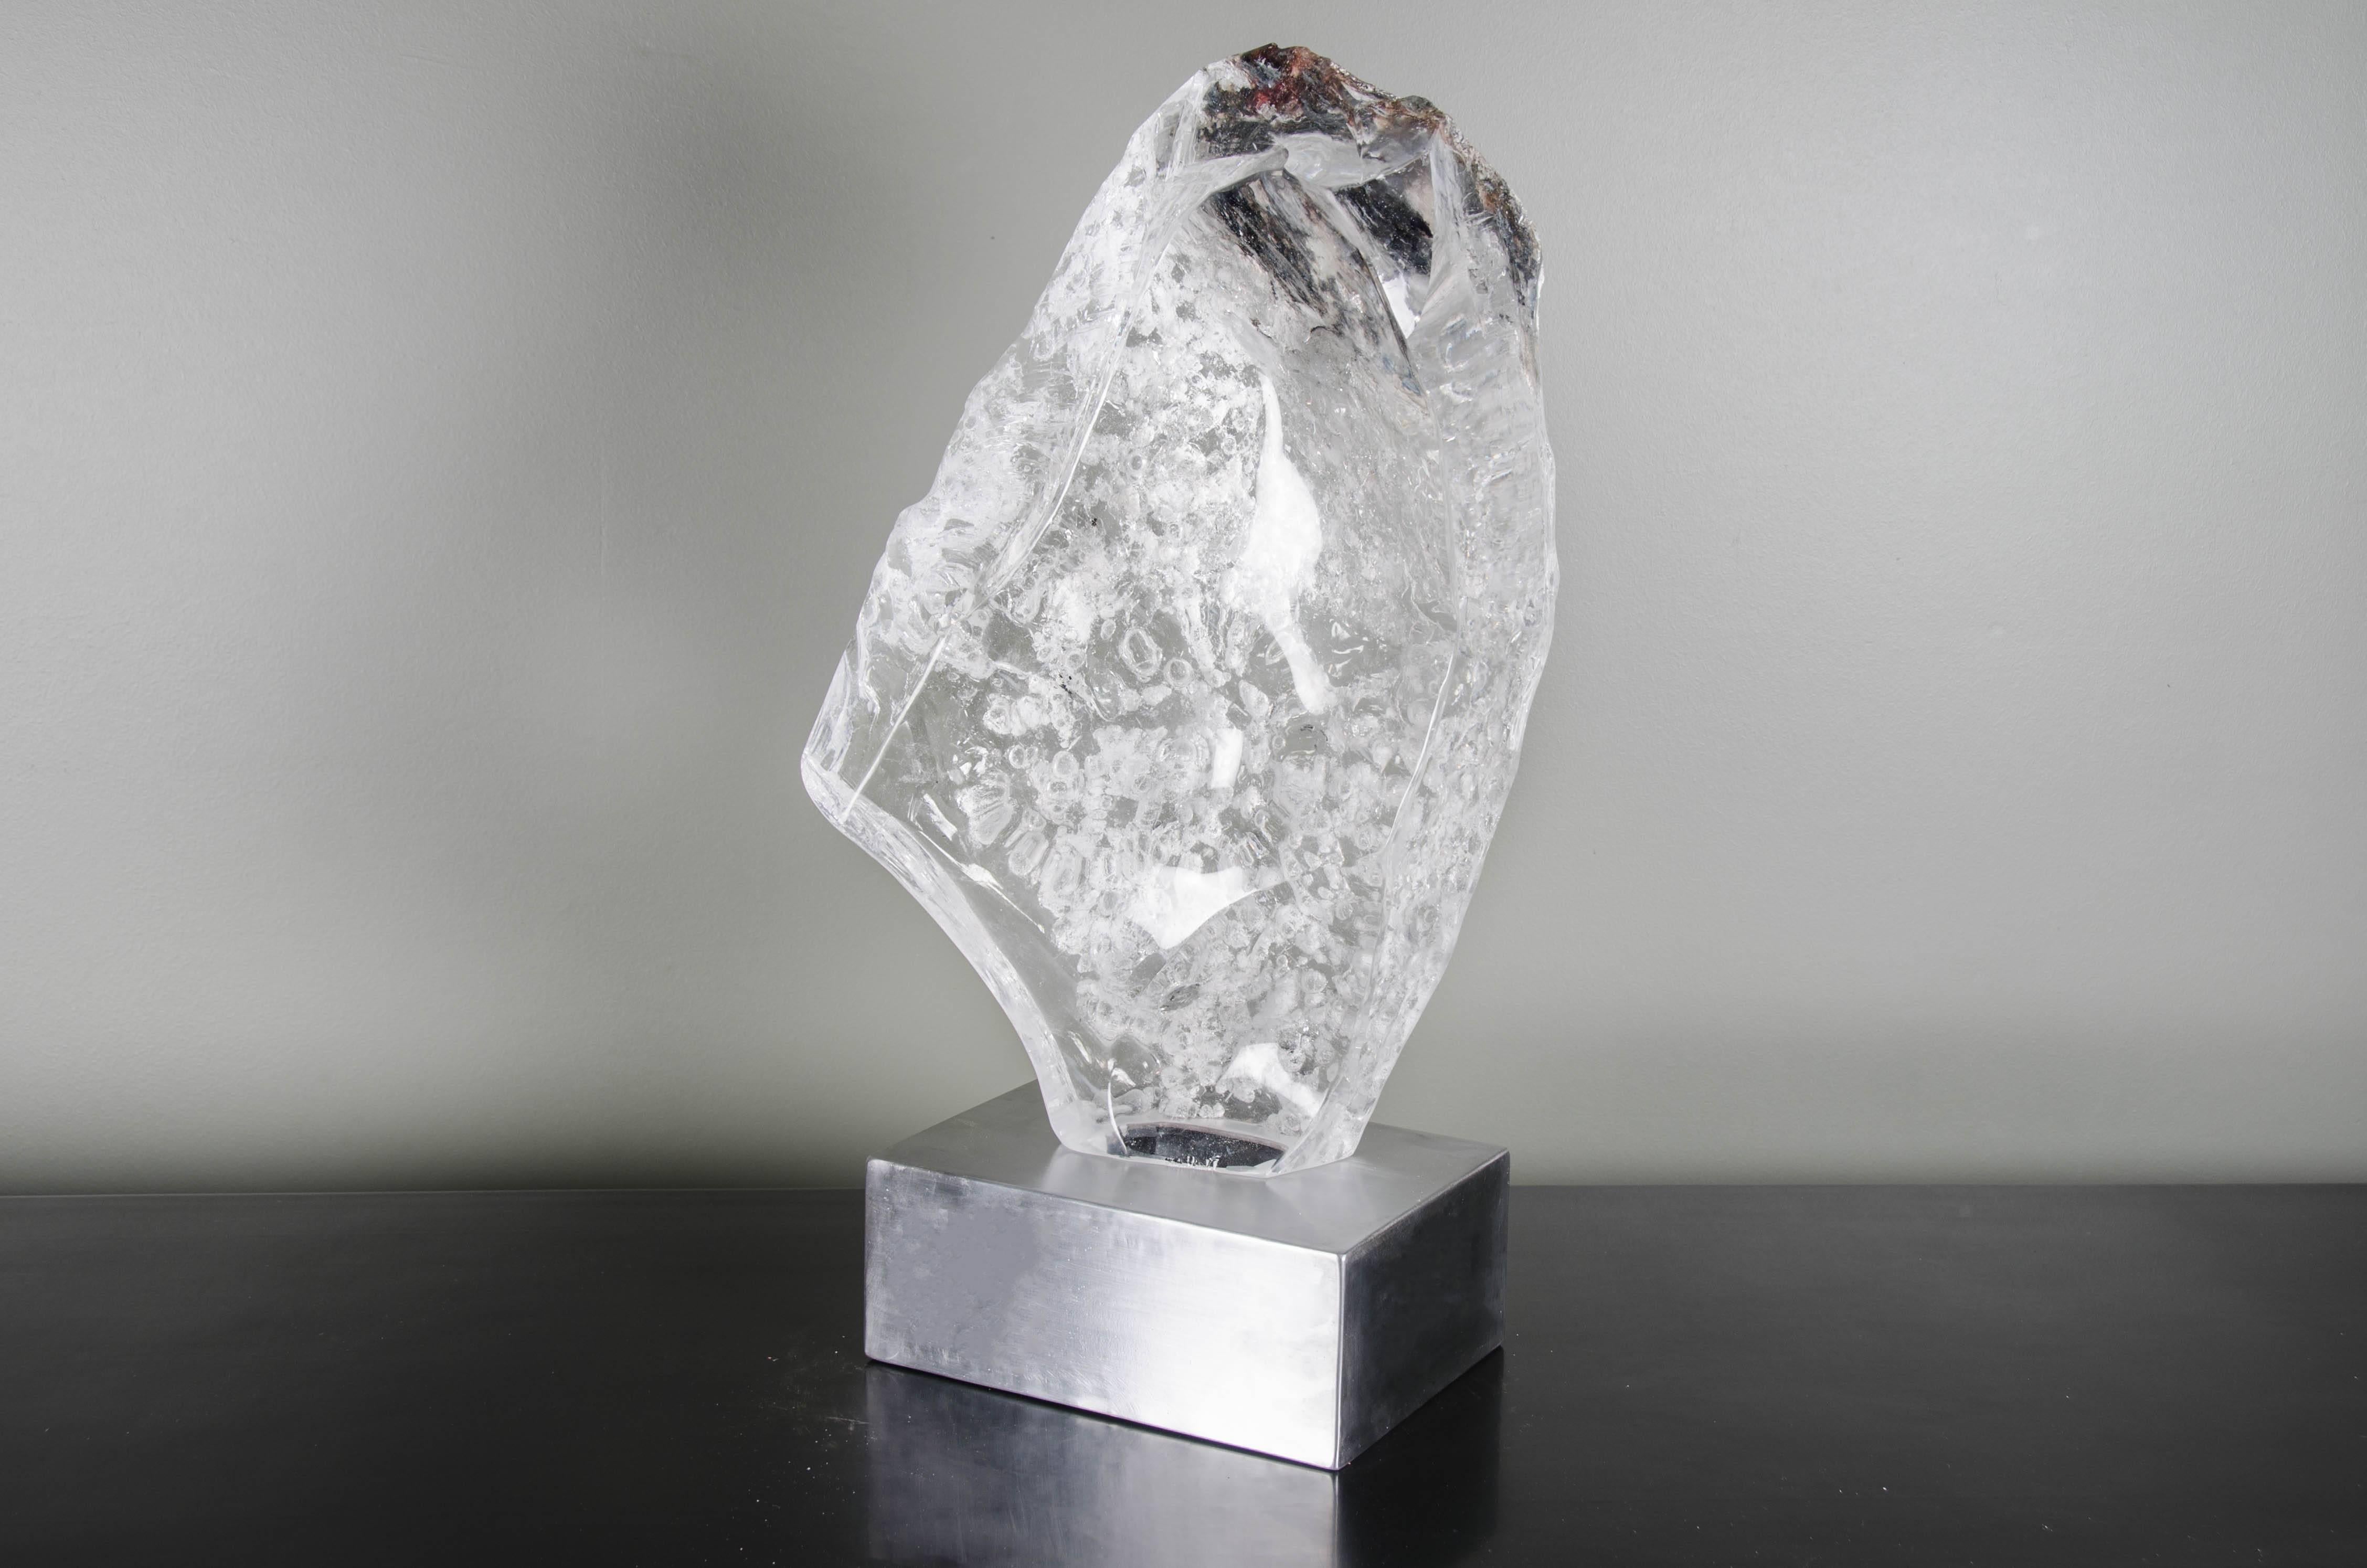 Contemporary Crystal Sculpture by Robert Kuo, Hand-Carved, One of a Kind